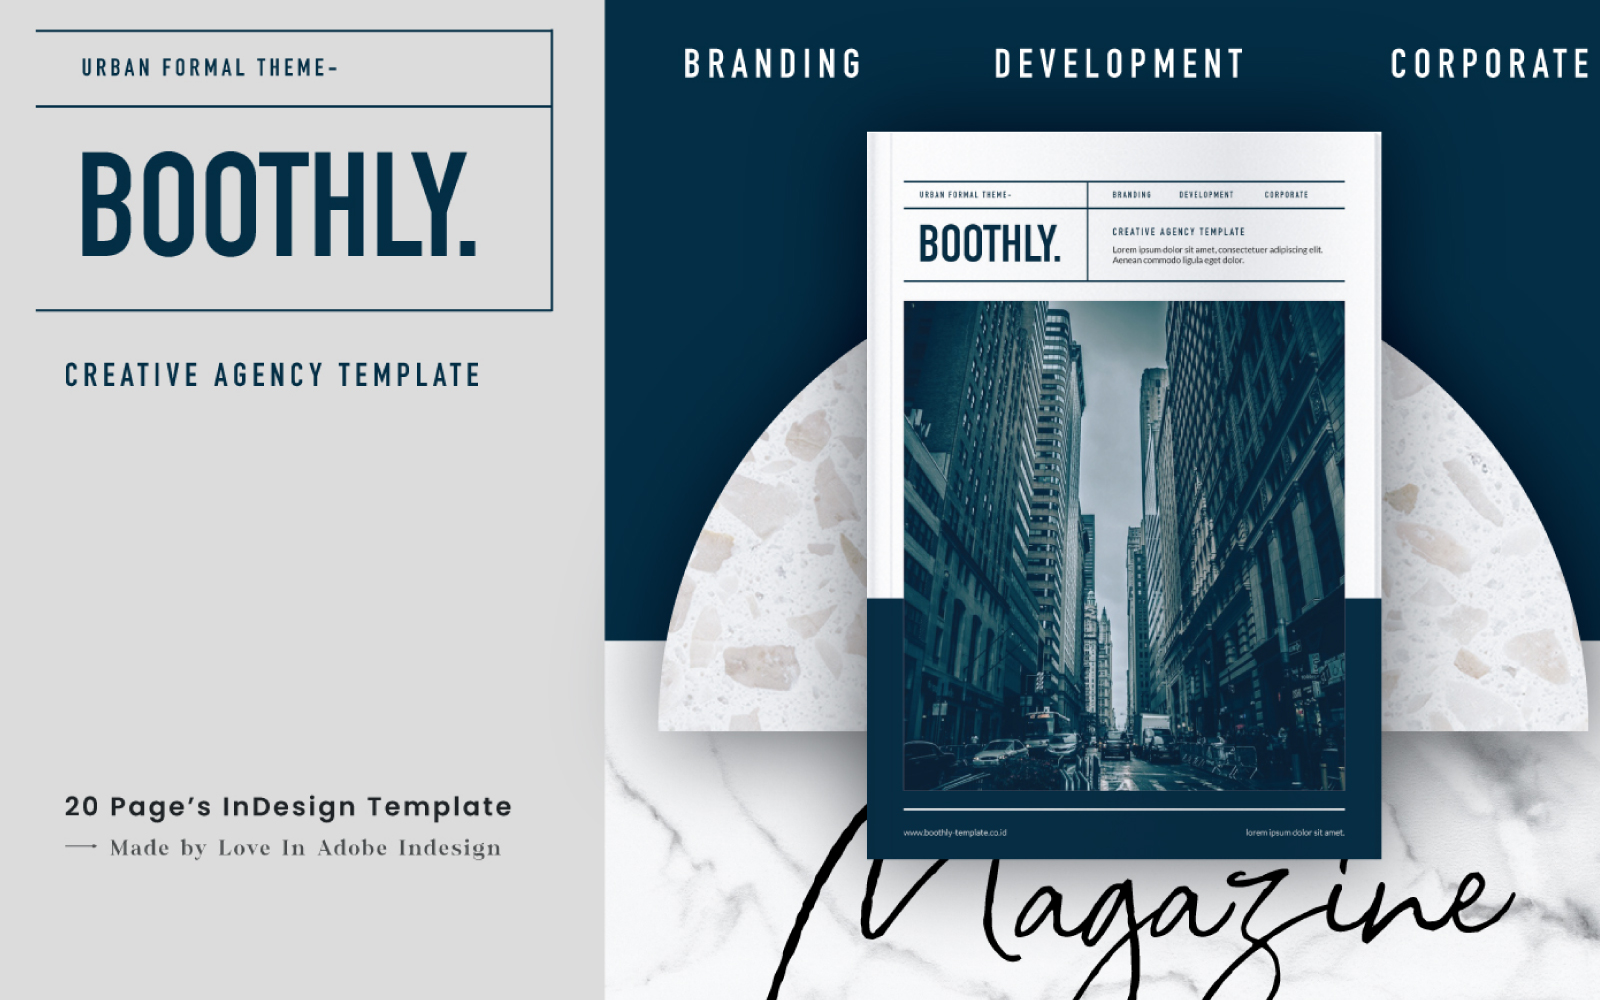 BOOTHLY CREATIVE AGENCY Magazine Template